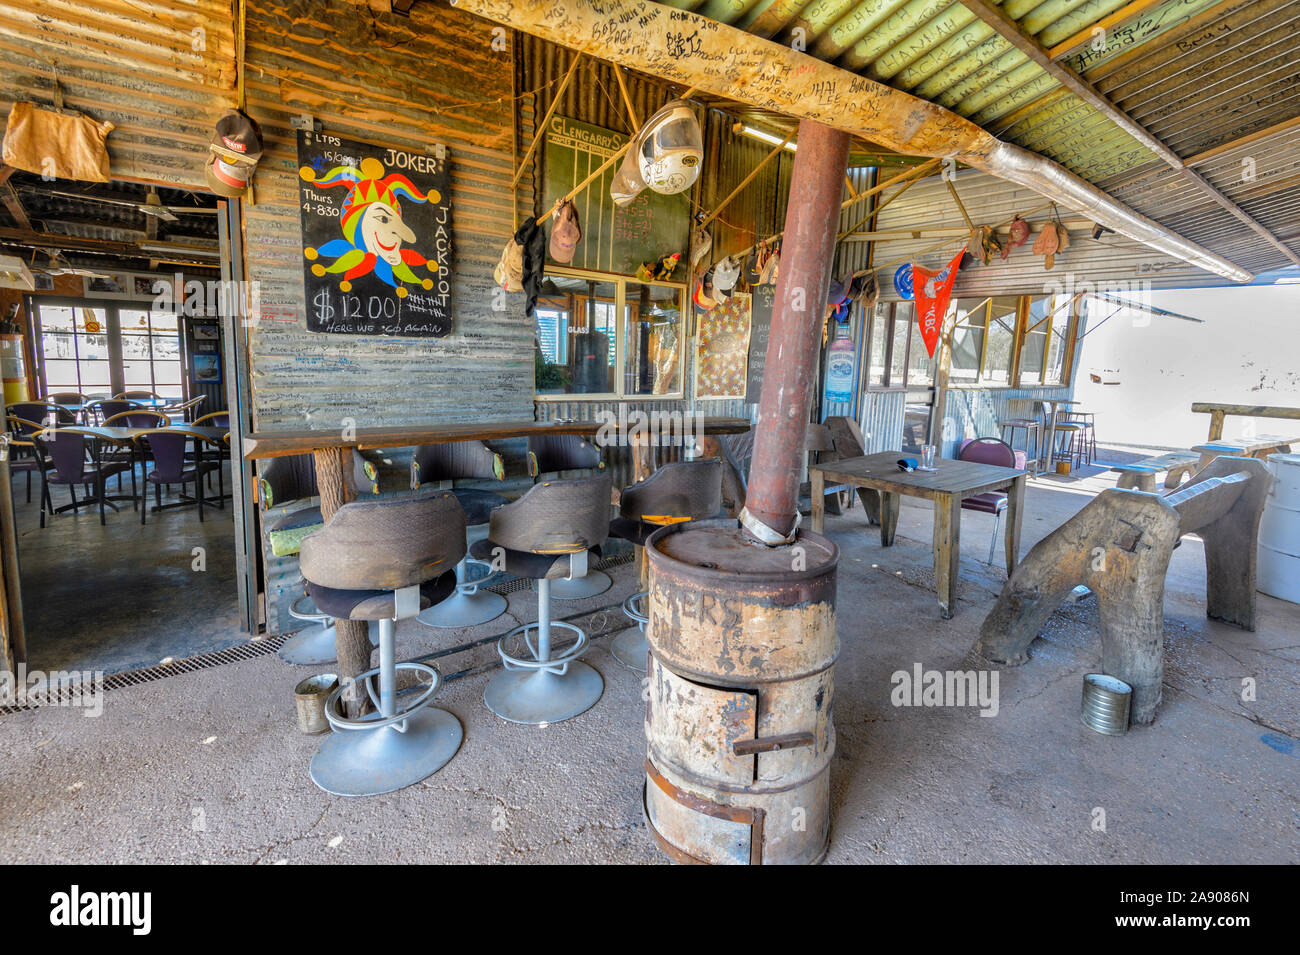 View of the popular Outback pub The Glengarry Hilton, The Grawin, Lightning Ridge, New South Wales, NSW, Australia Stock Photo